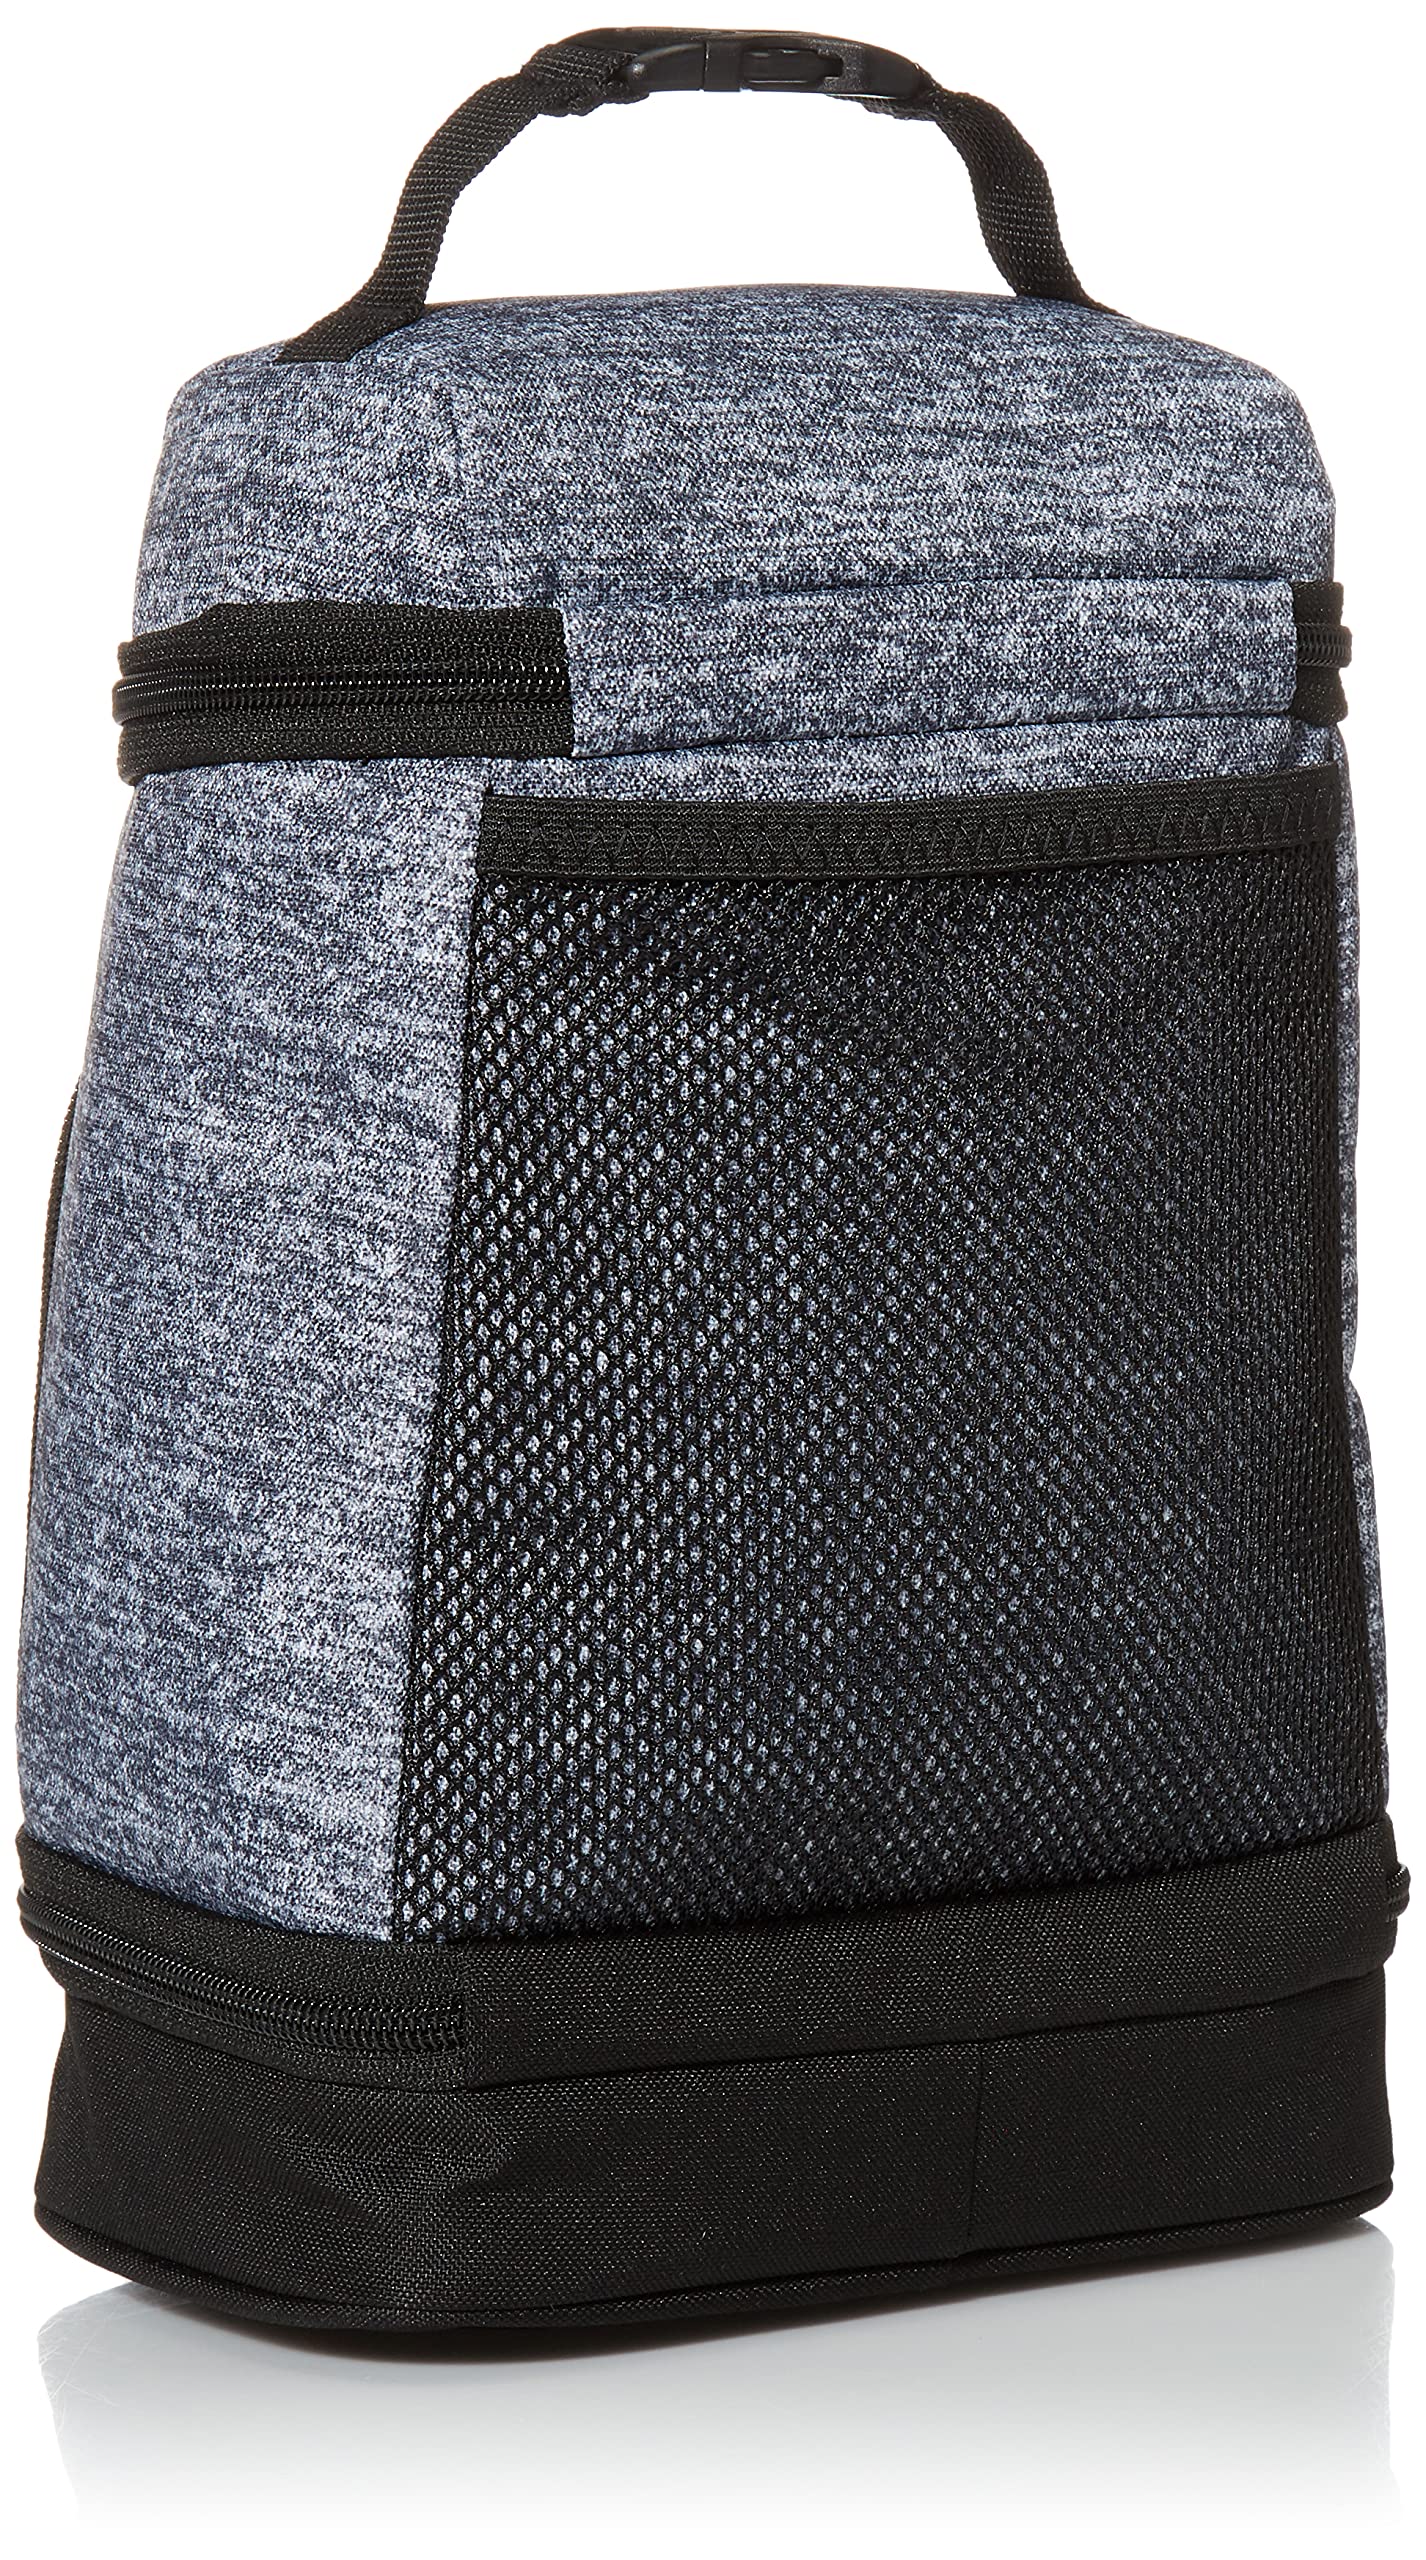 adidas Unisex Excel 2 Insulated Lunch Bag (Onix Grey/Black) $12.80 + Free Shipping w/ Prime or on $35+